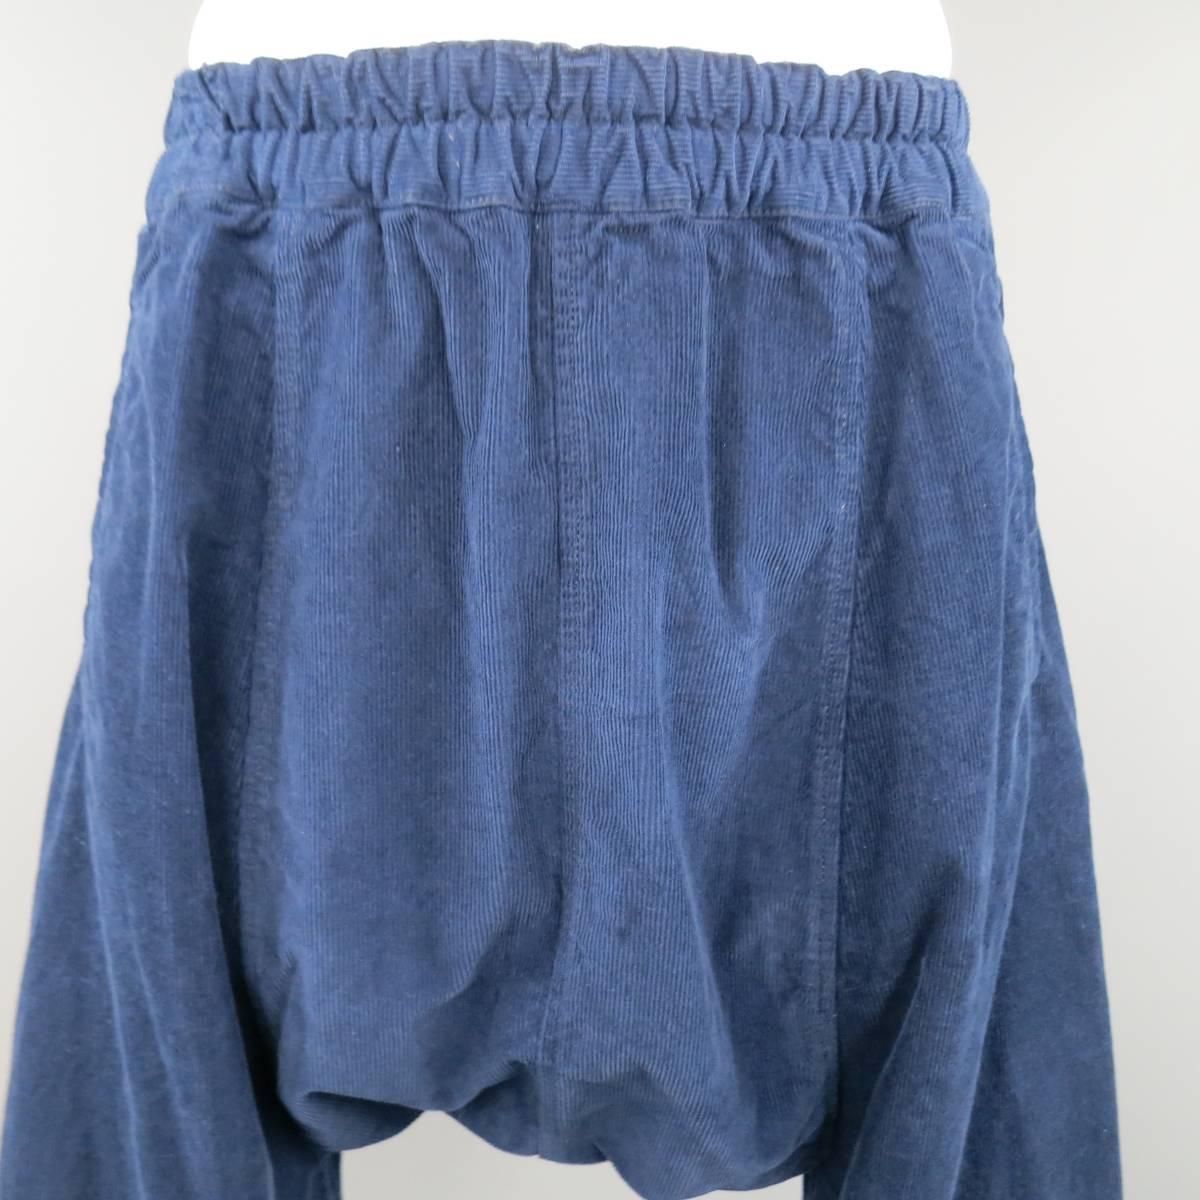 COMME des GARCONS SHIRT cropped trousers come in navy blue cotton corduroy and feature an elastic waistband, drop crotch panel, and back patch pockets.  Made in France.
 
Good Pre-Owned Condition.
Marked: M
 
Measurements:
 
Waist: 28 in.
Rise:19.5